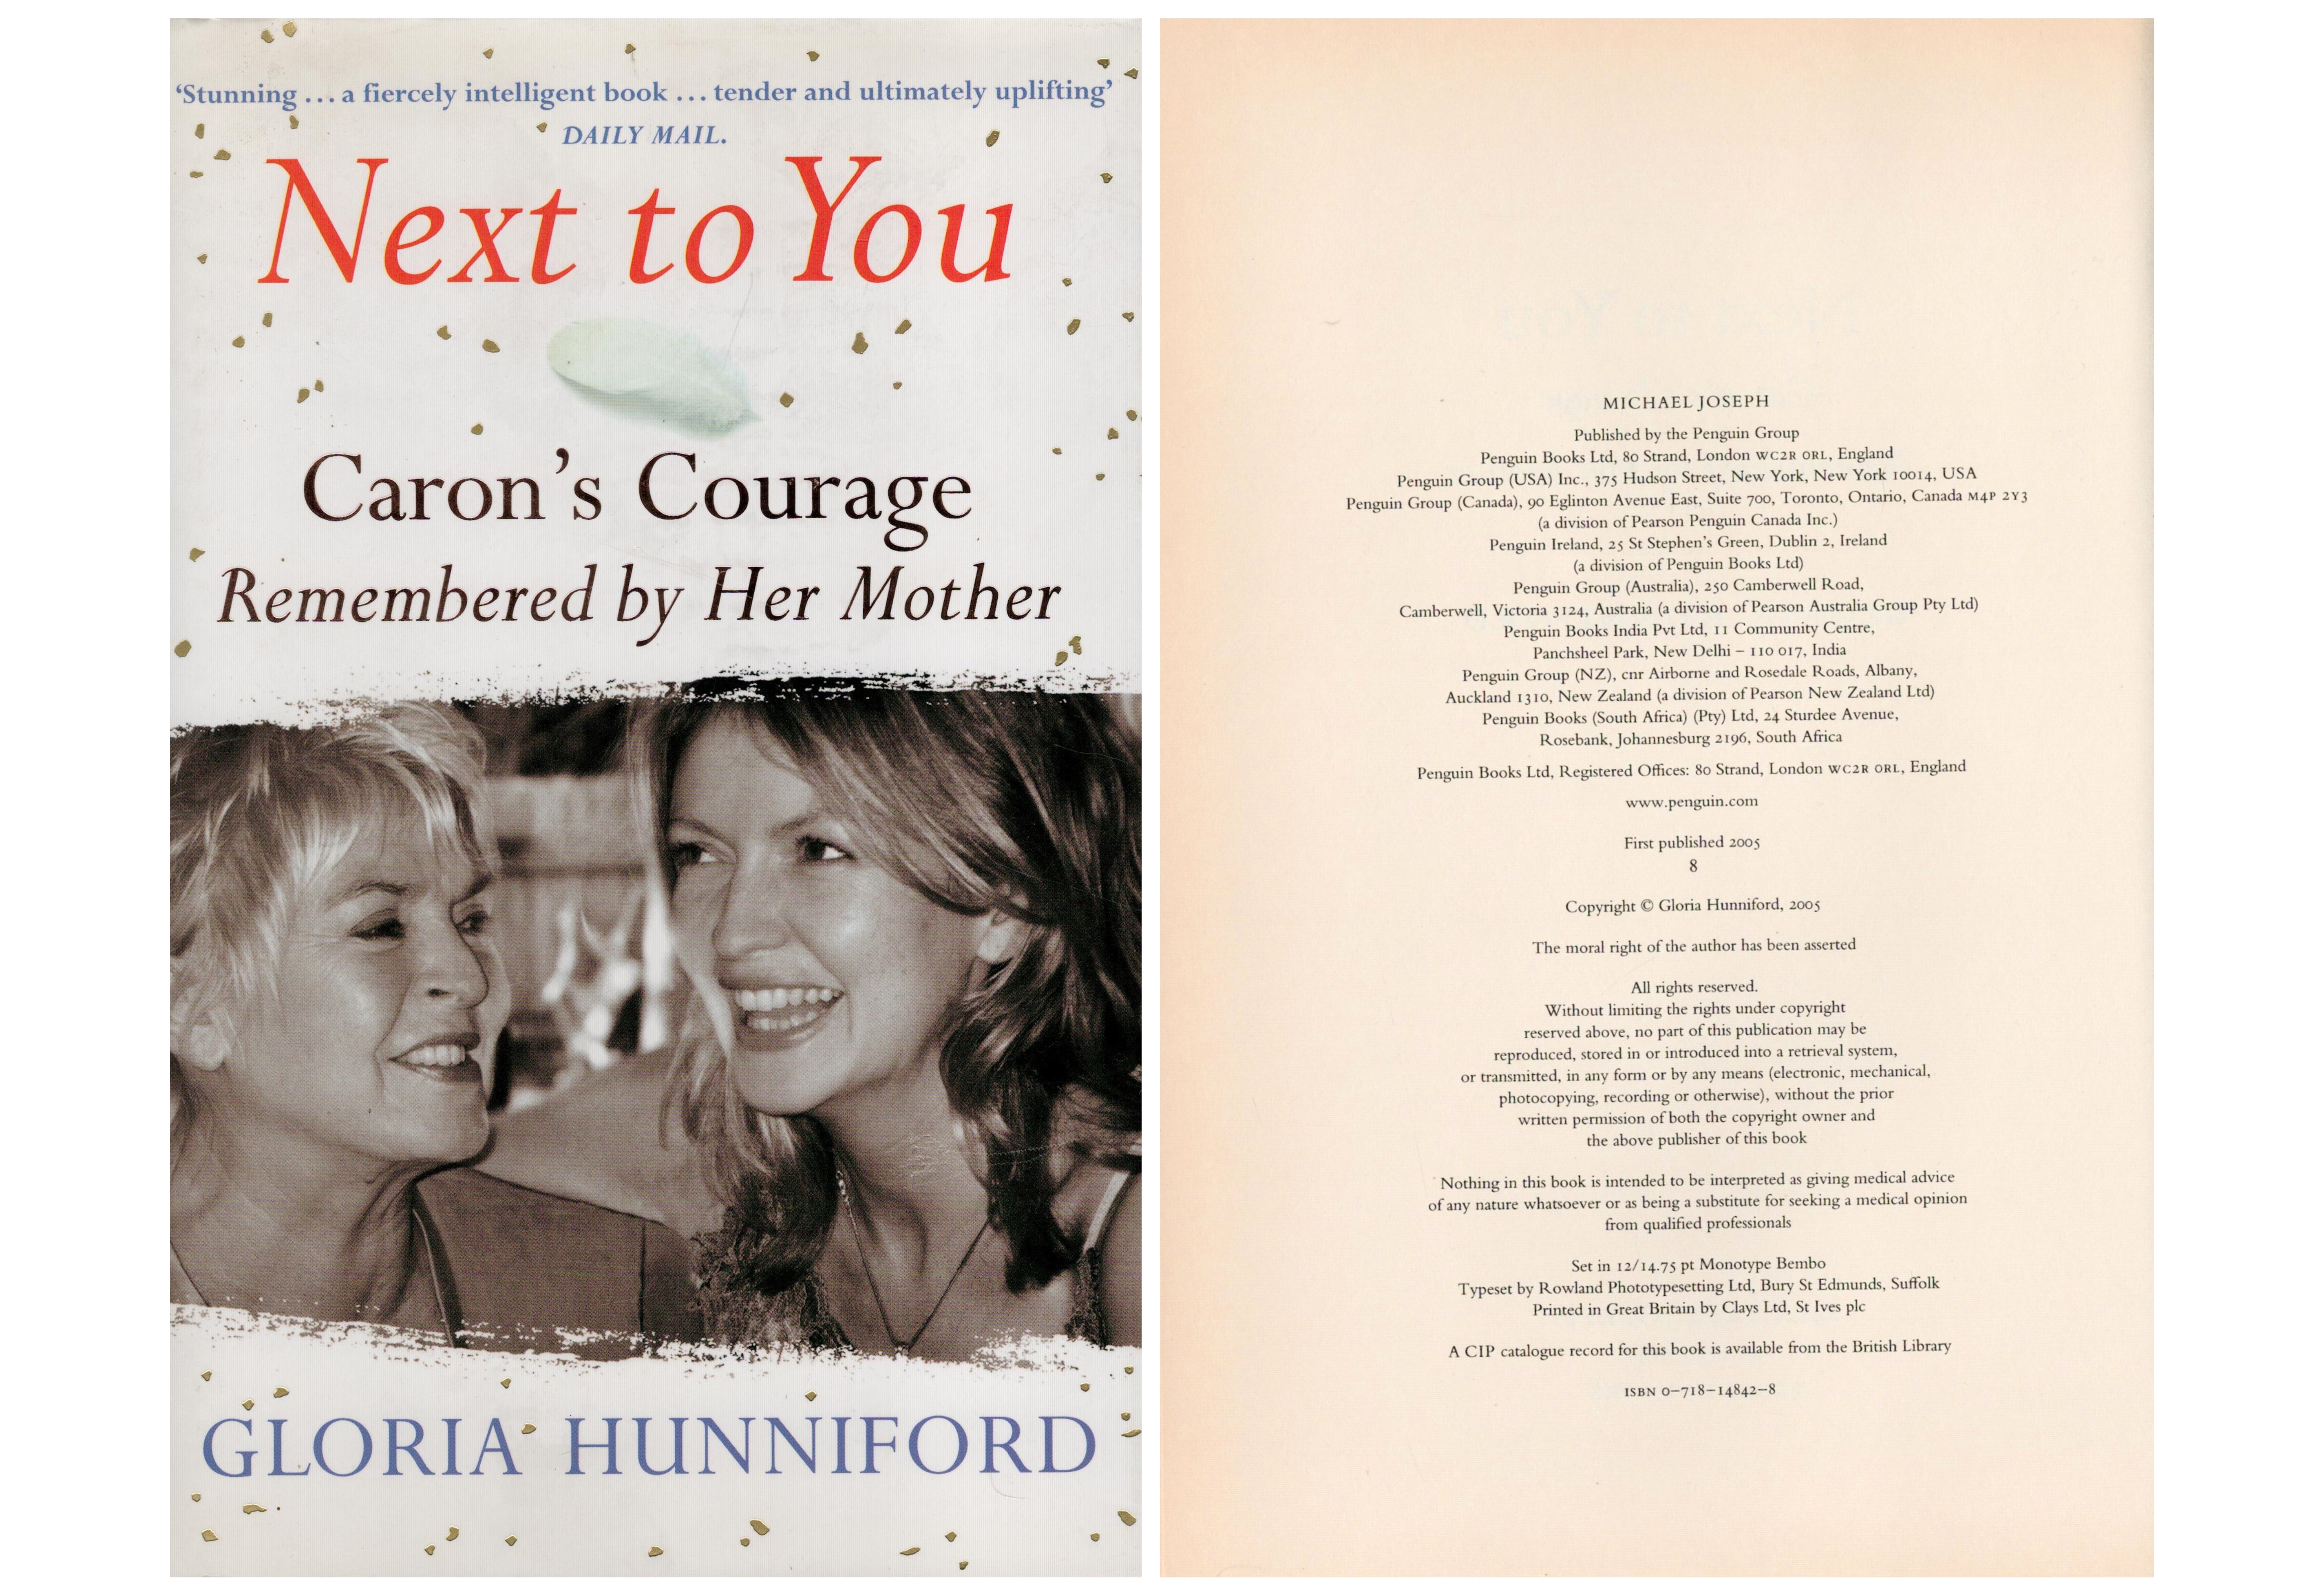 Next To You by Gloria Hunniford first edition 2005 hardback book. Unsigned. Good Condition. All